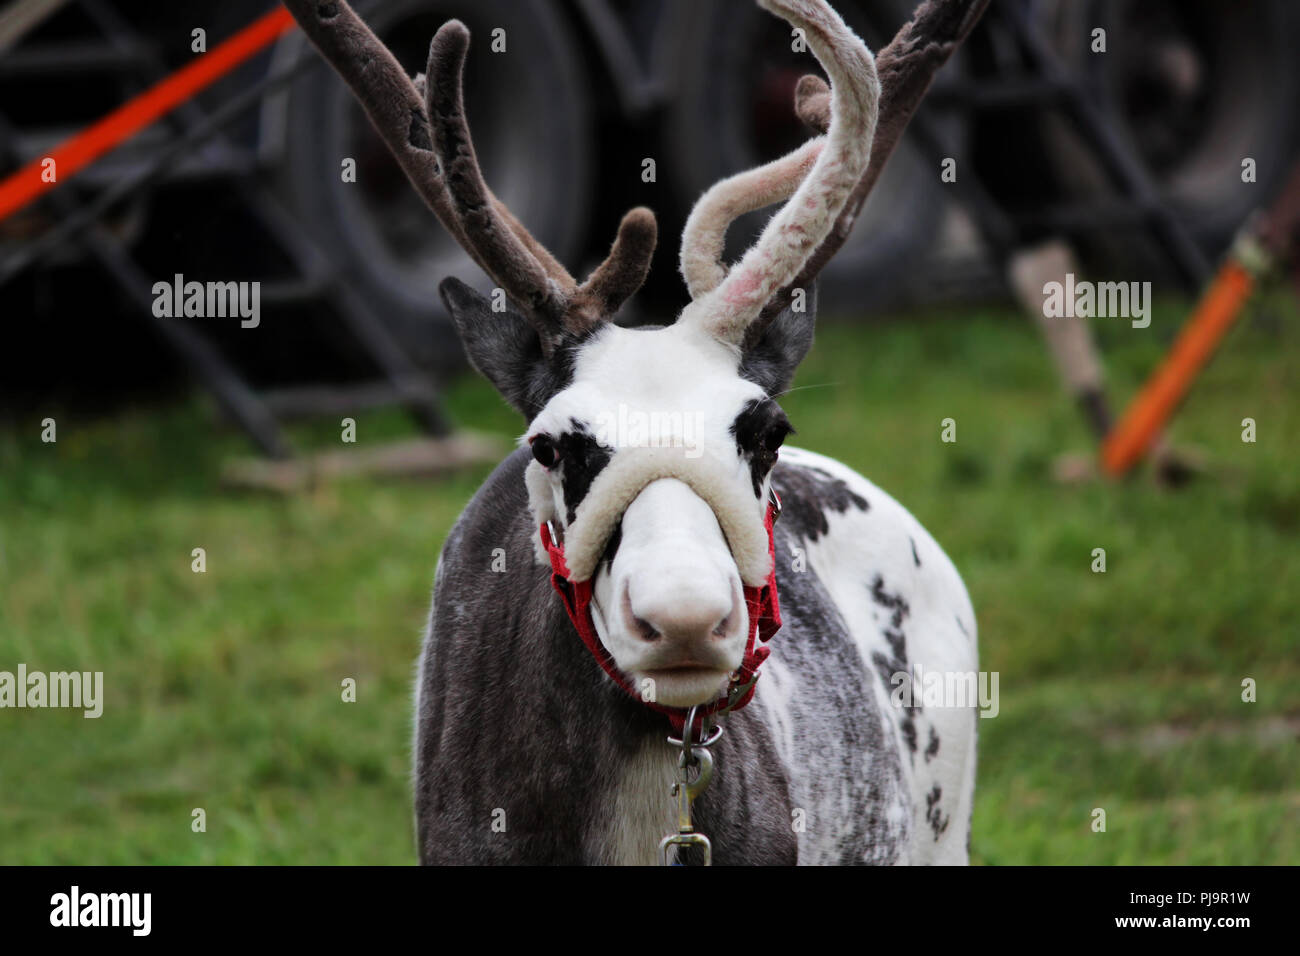 a circus reindeer Rangifer tarandus in a red bridle is tied next to a tent of a wandering circus set on a wasteland. Stock Photo